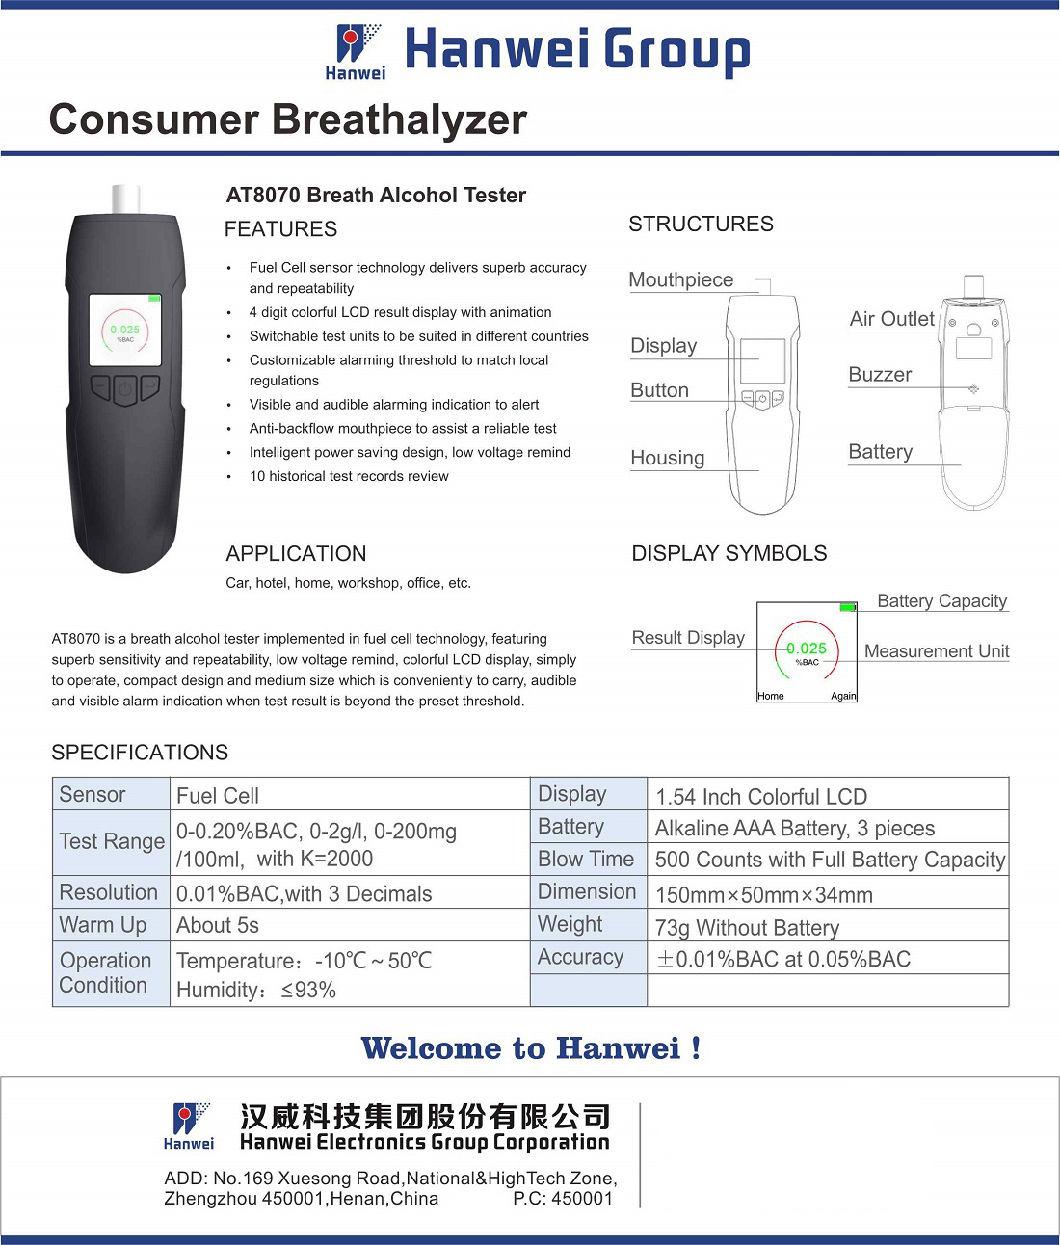 Good Sale Alcohol Test Machine Personal Portable Digital Display Breath Fuel Cell Alcohol Tester